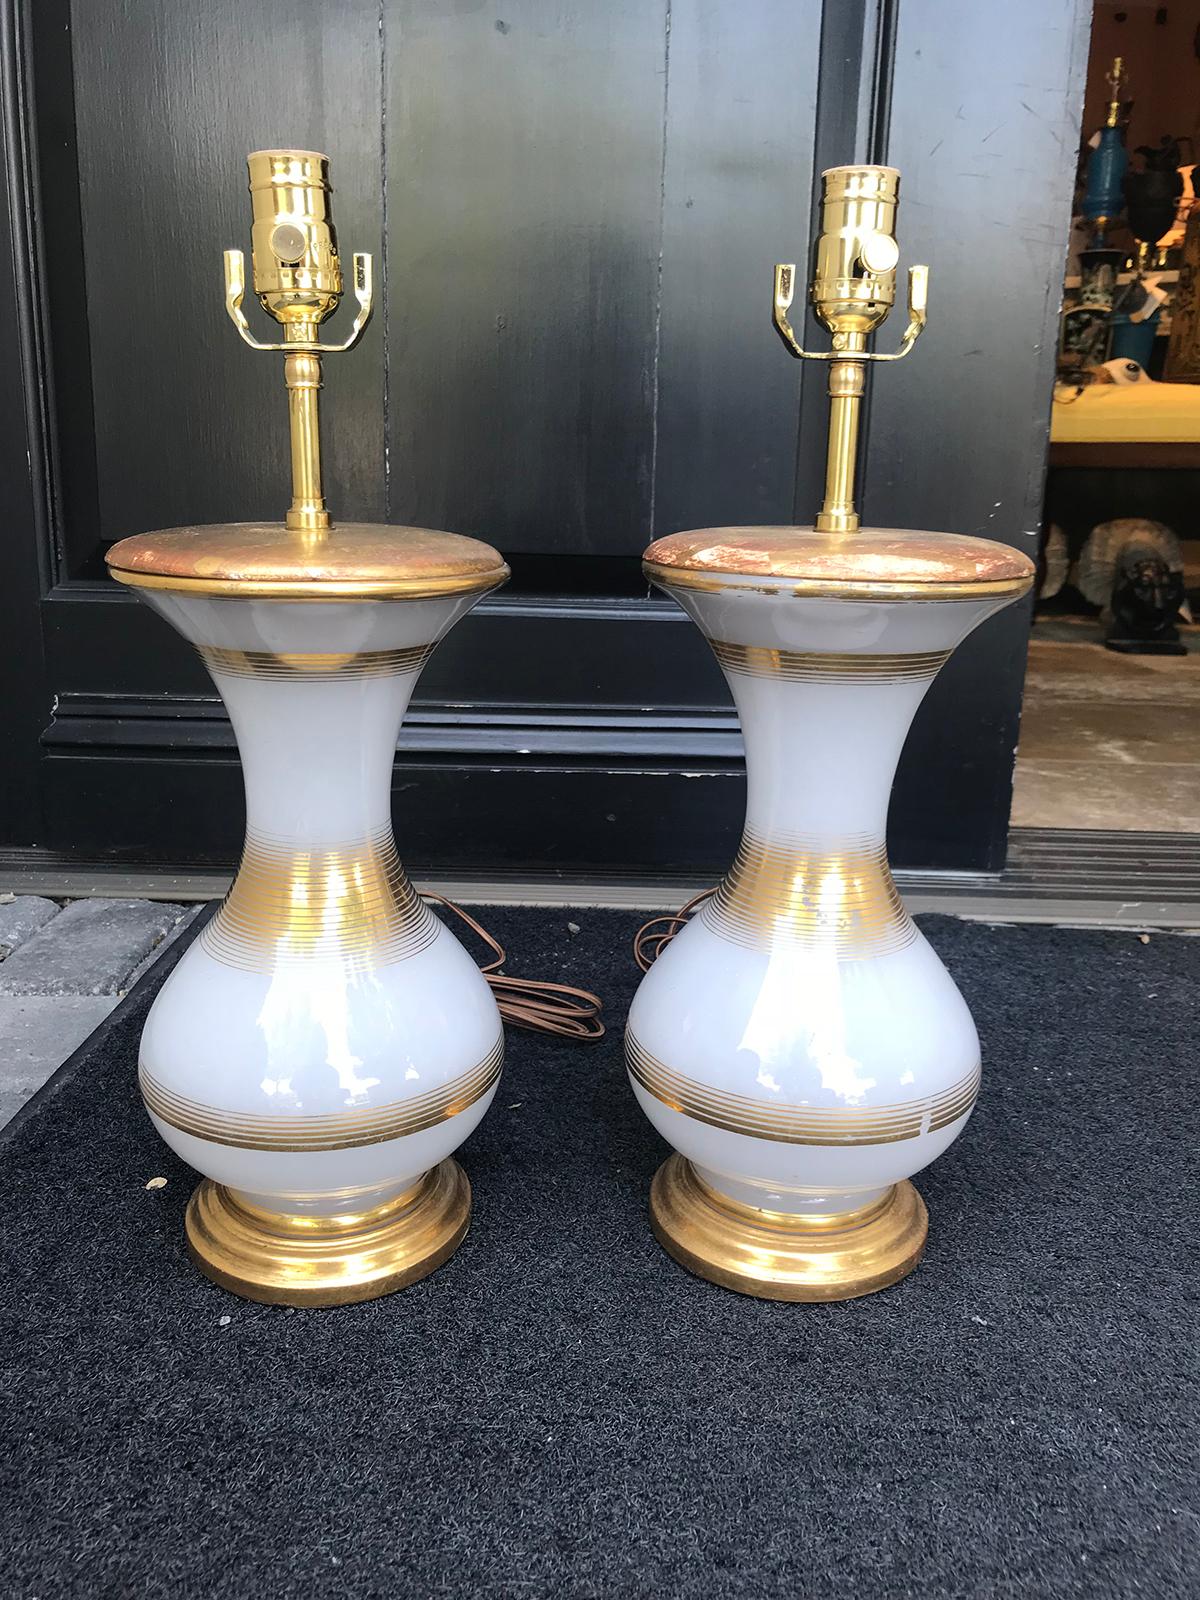 Pair of 20th century French white and gold opaline glass lamps on custom bases
New wiring
5.25